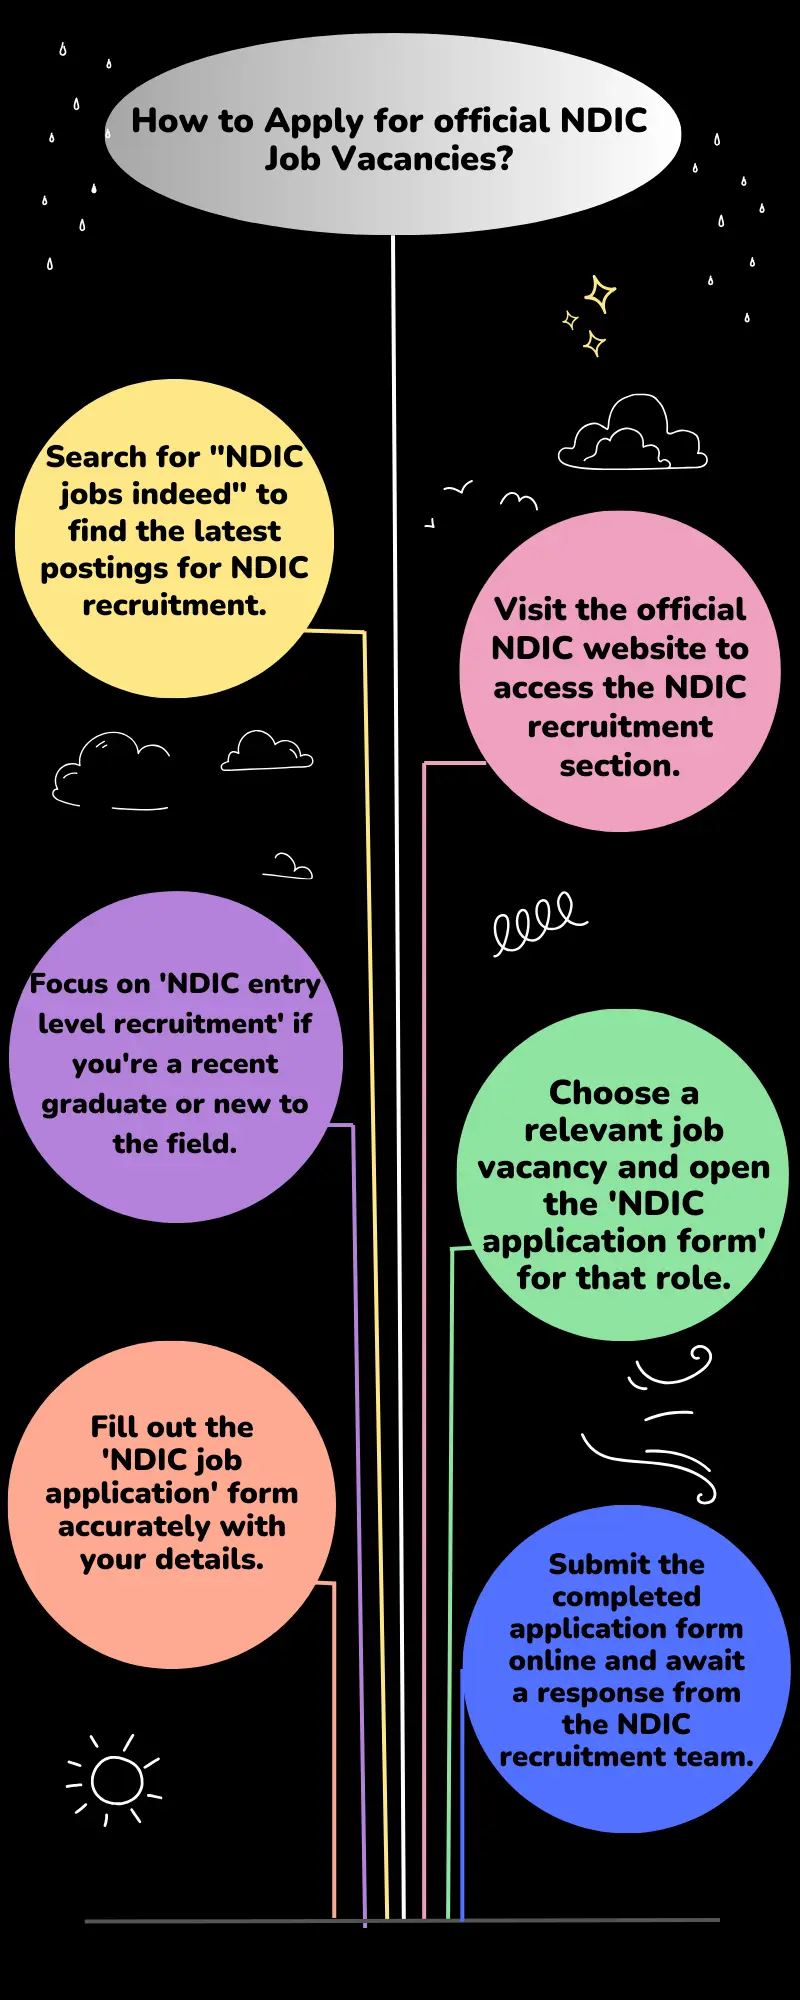 How to Apply for official NDIC Job Vacancies?